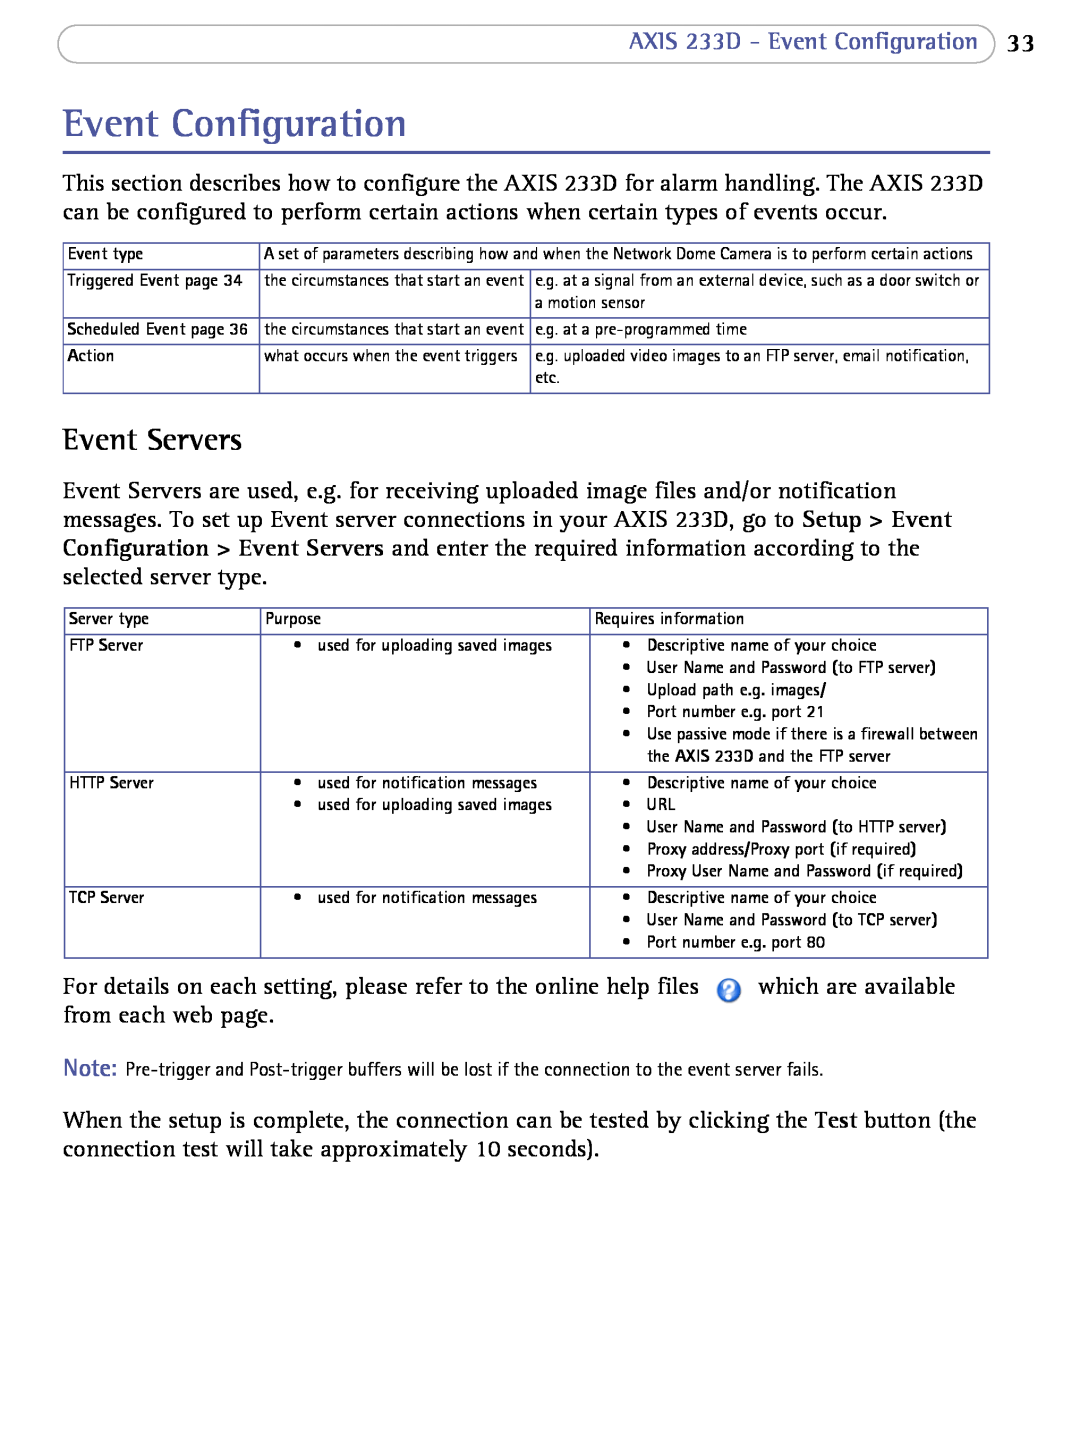 Axis Communications Event Servers, AXIS 233D - Event Configuration, which are available, from each web page 